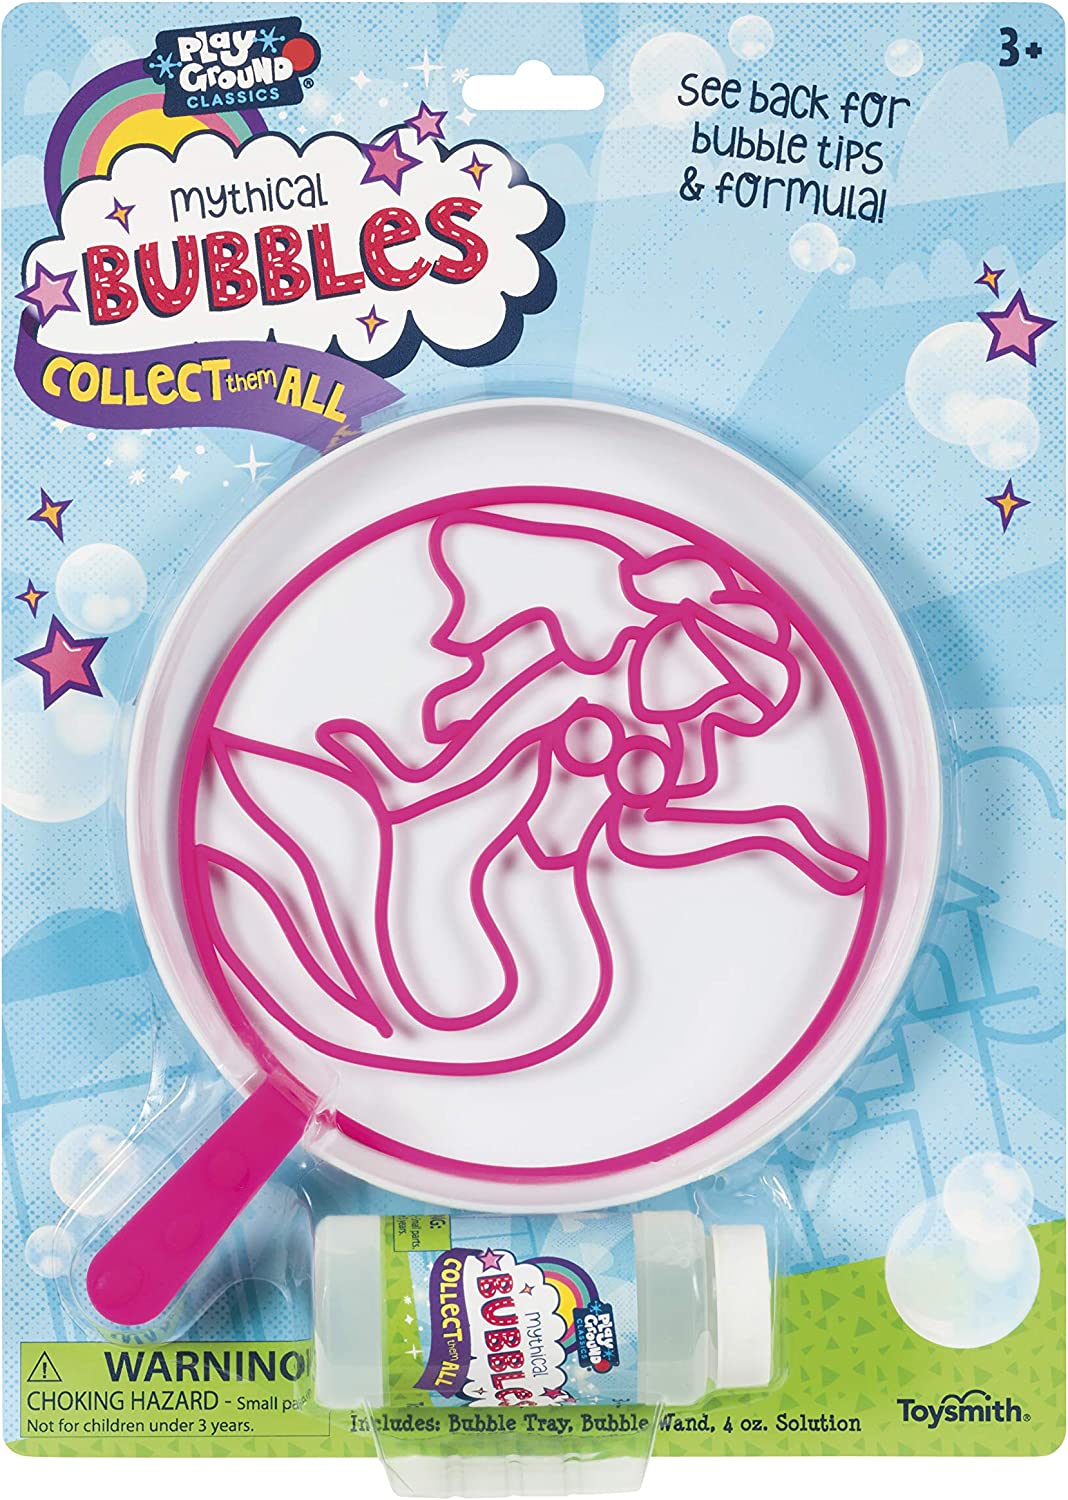 MYTHICAL BUBBLE WANDS